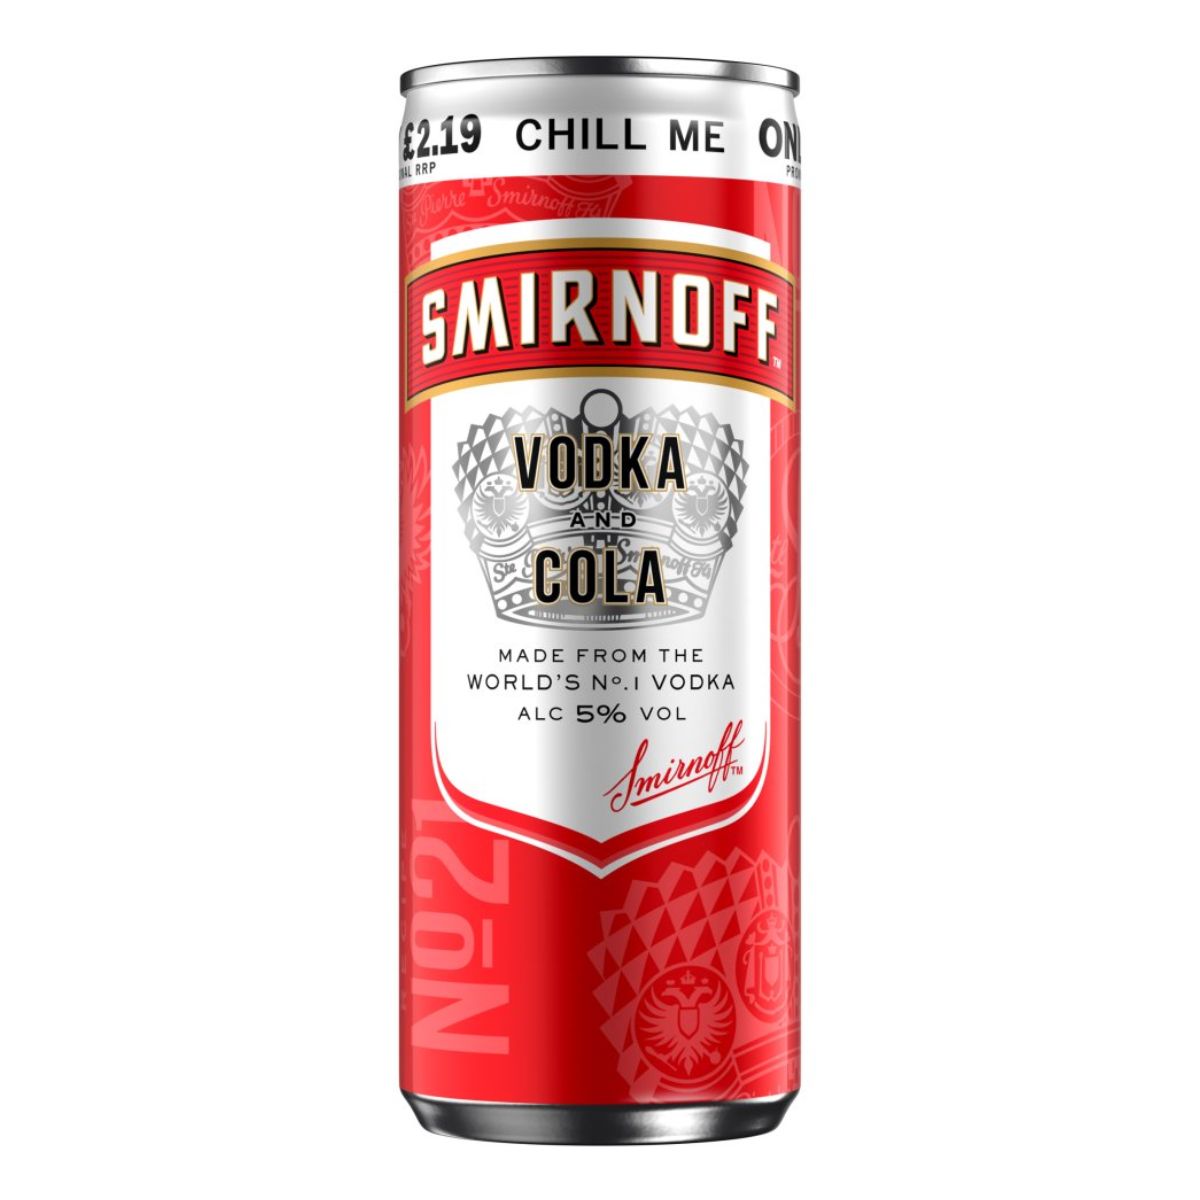 A can of Smirnoff - No.21 Vodka and Cola Ready to Drink Premix Can (5.0% ABV) - 250ml on a white background.